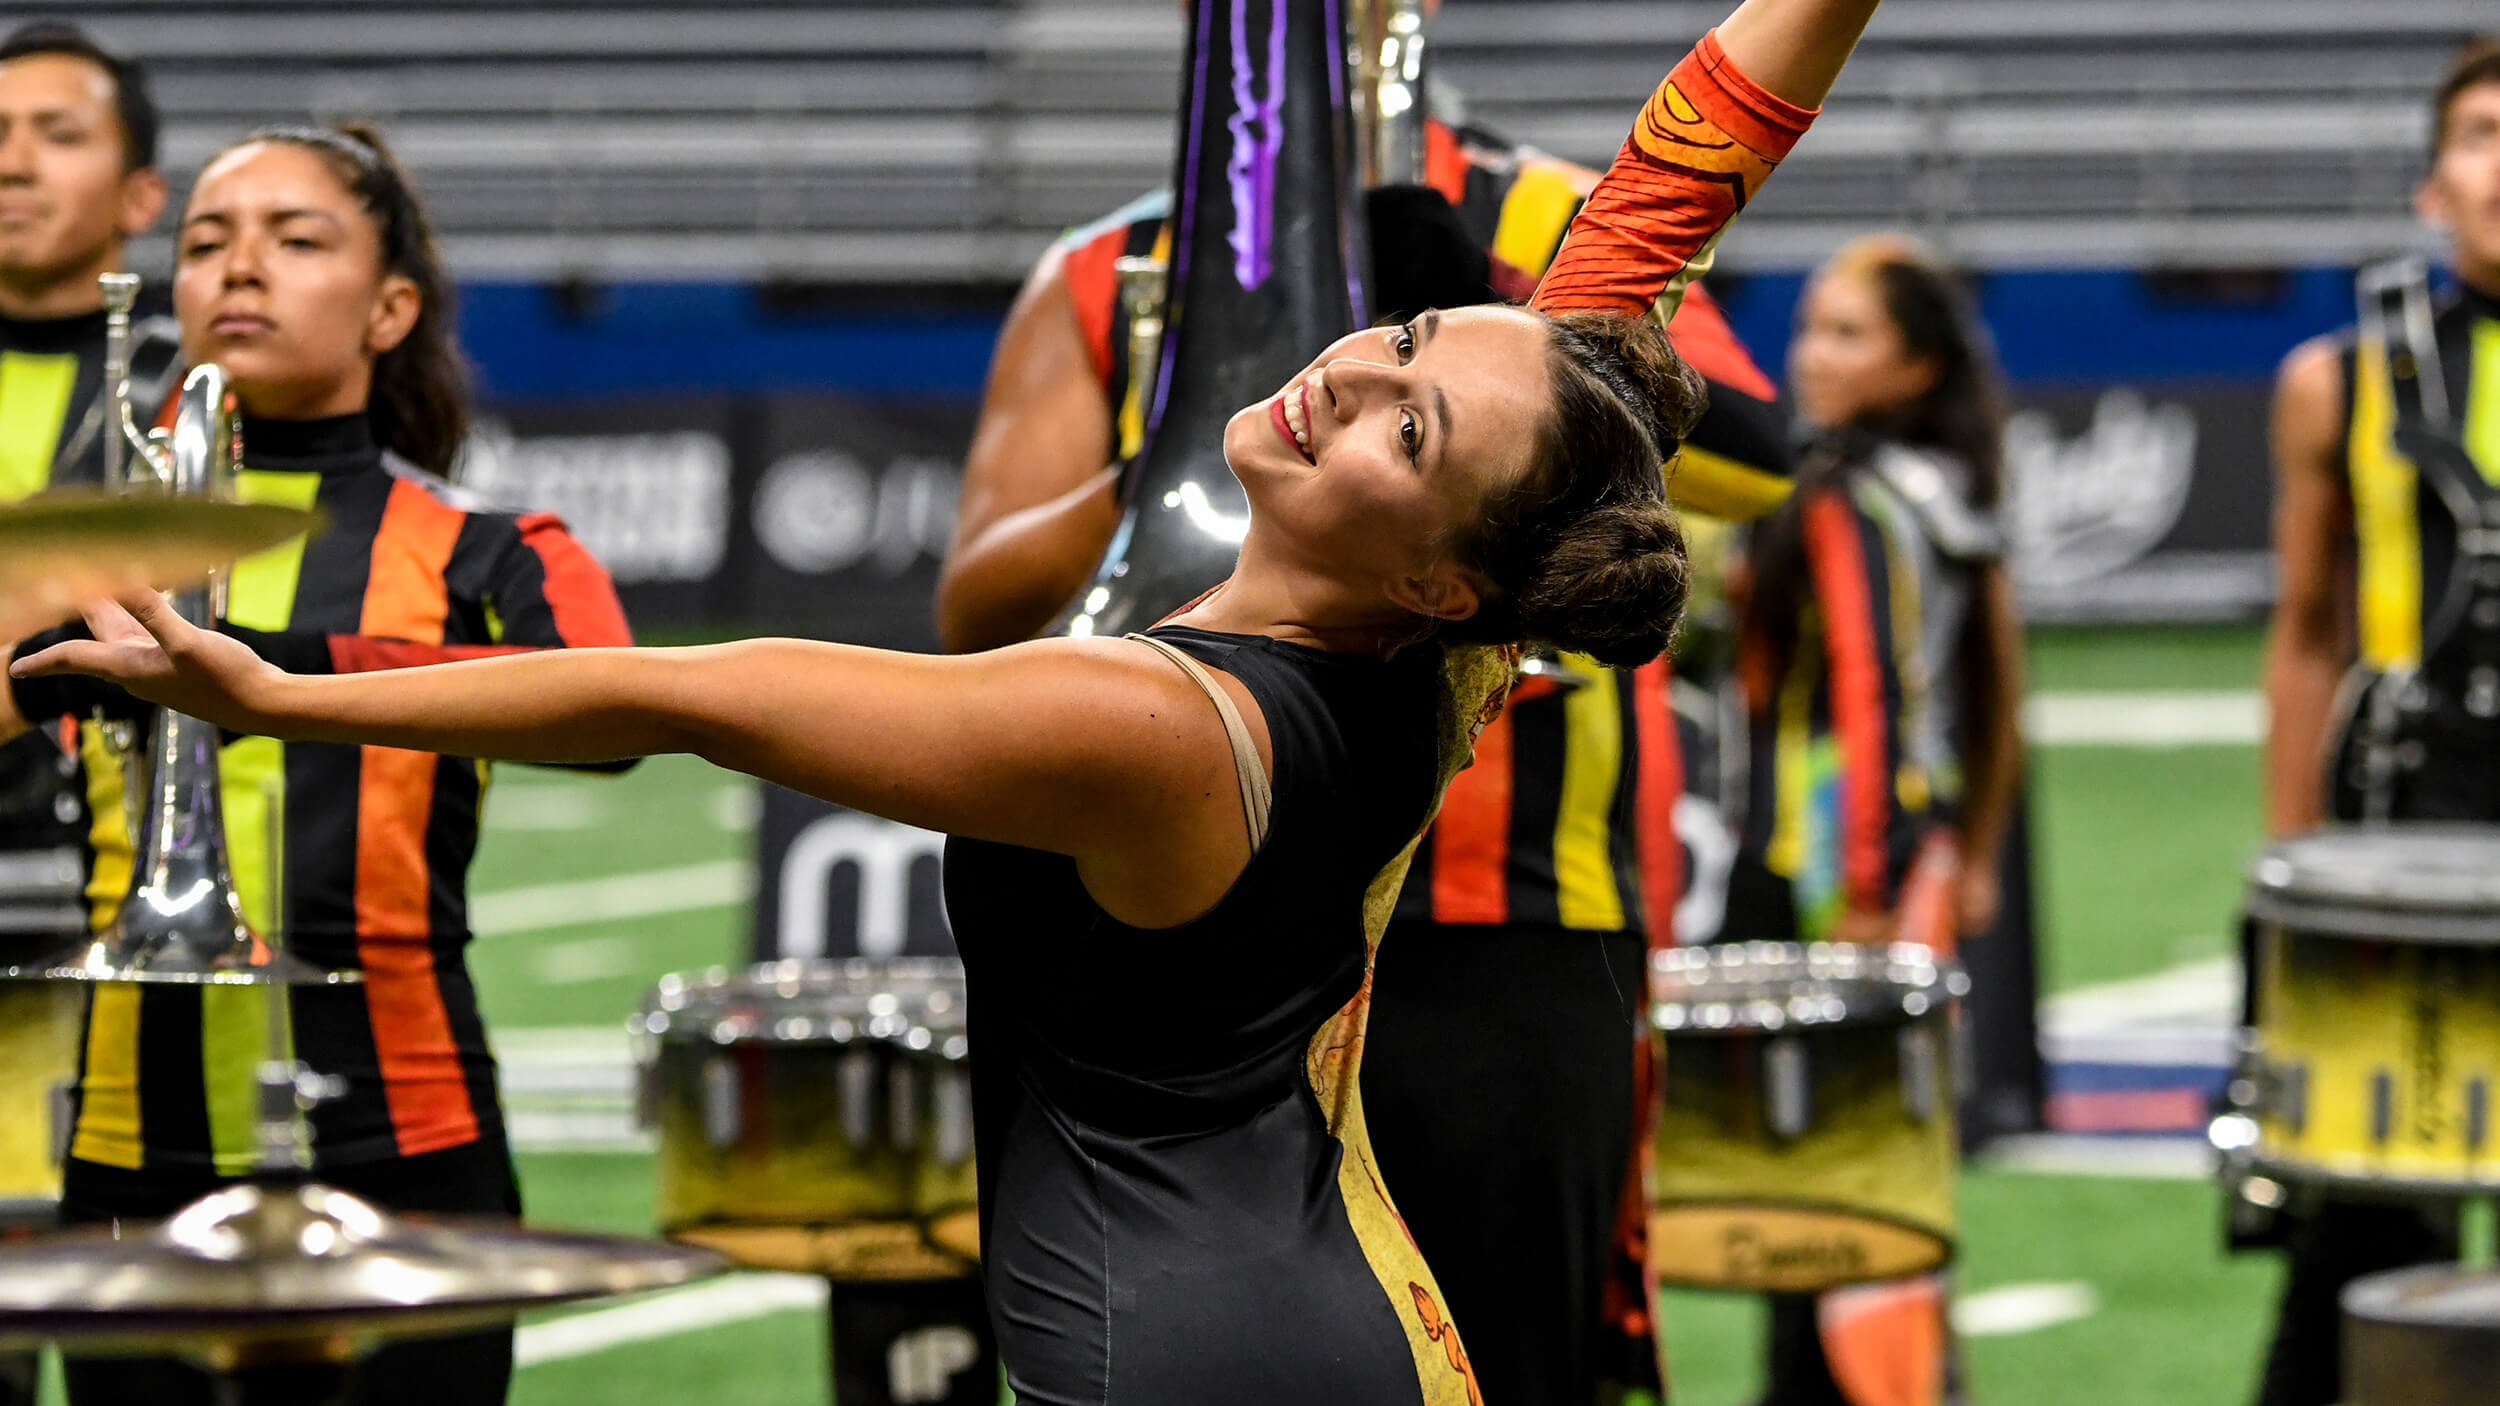 Prior to 2022's return, Arsenal last appeared on the DCI Tour at the 2019 DCI Southwestern Championship in San Antonio.